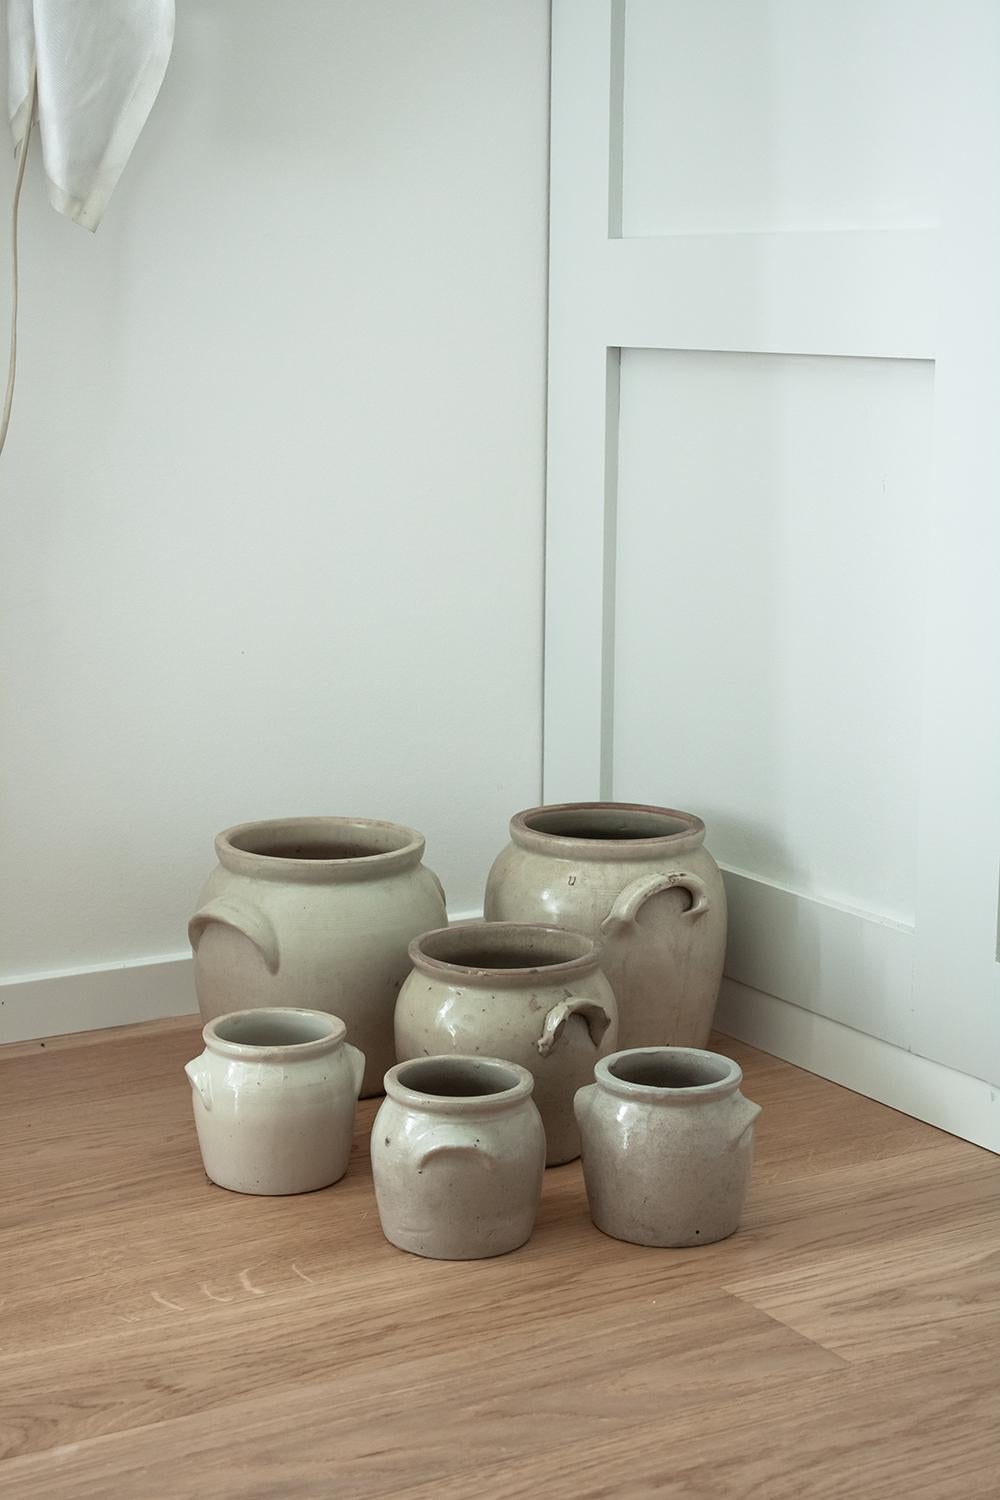 Available are 3 same-sized french stoneware crocks. Individually sourced in the south of France, this set of glazed stoneware crocks is a staple of any French kitchen or interior. Used as storage vessels or flower vases, these crocks will add a